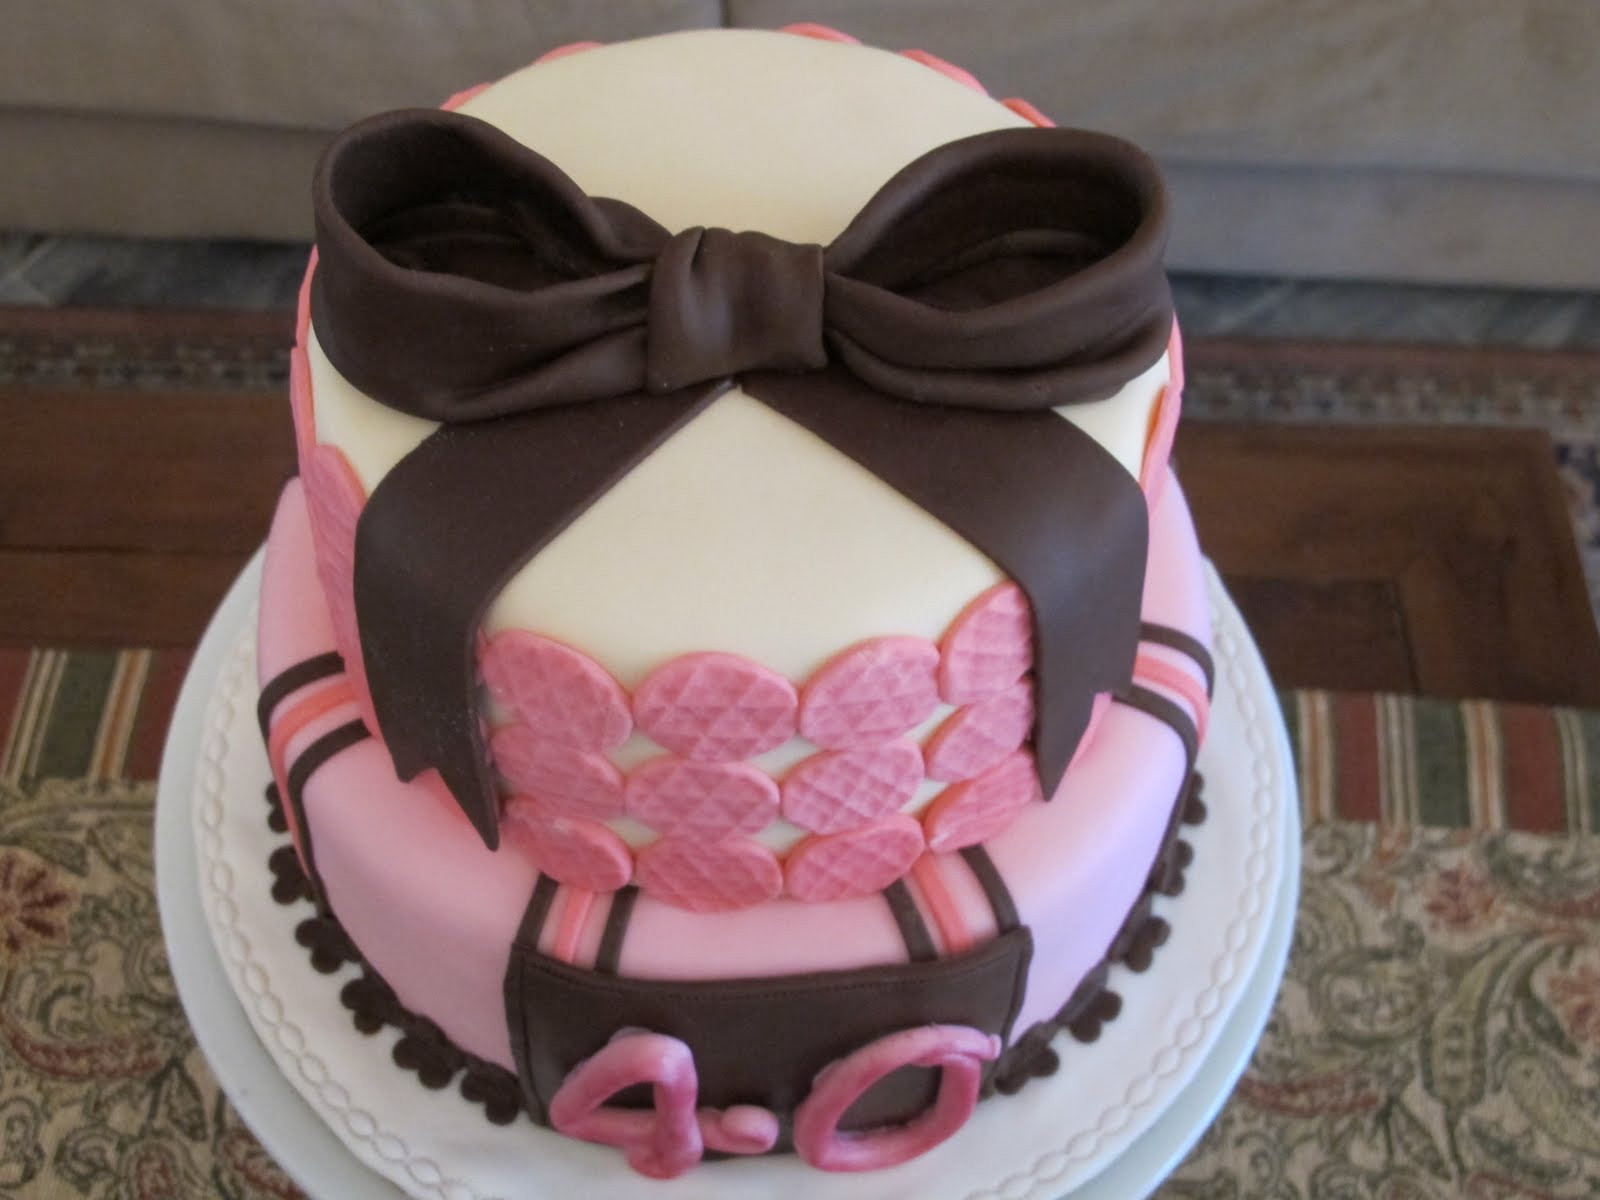 Best ideas about 40th Birthday Cake
. Save or Pin Pink Oven Cakes and Cookies 40th birthday cake Now.